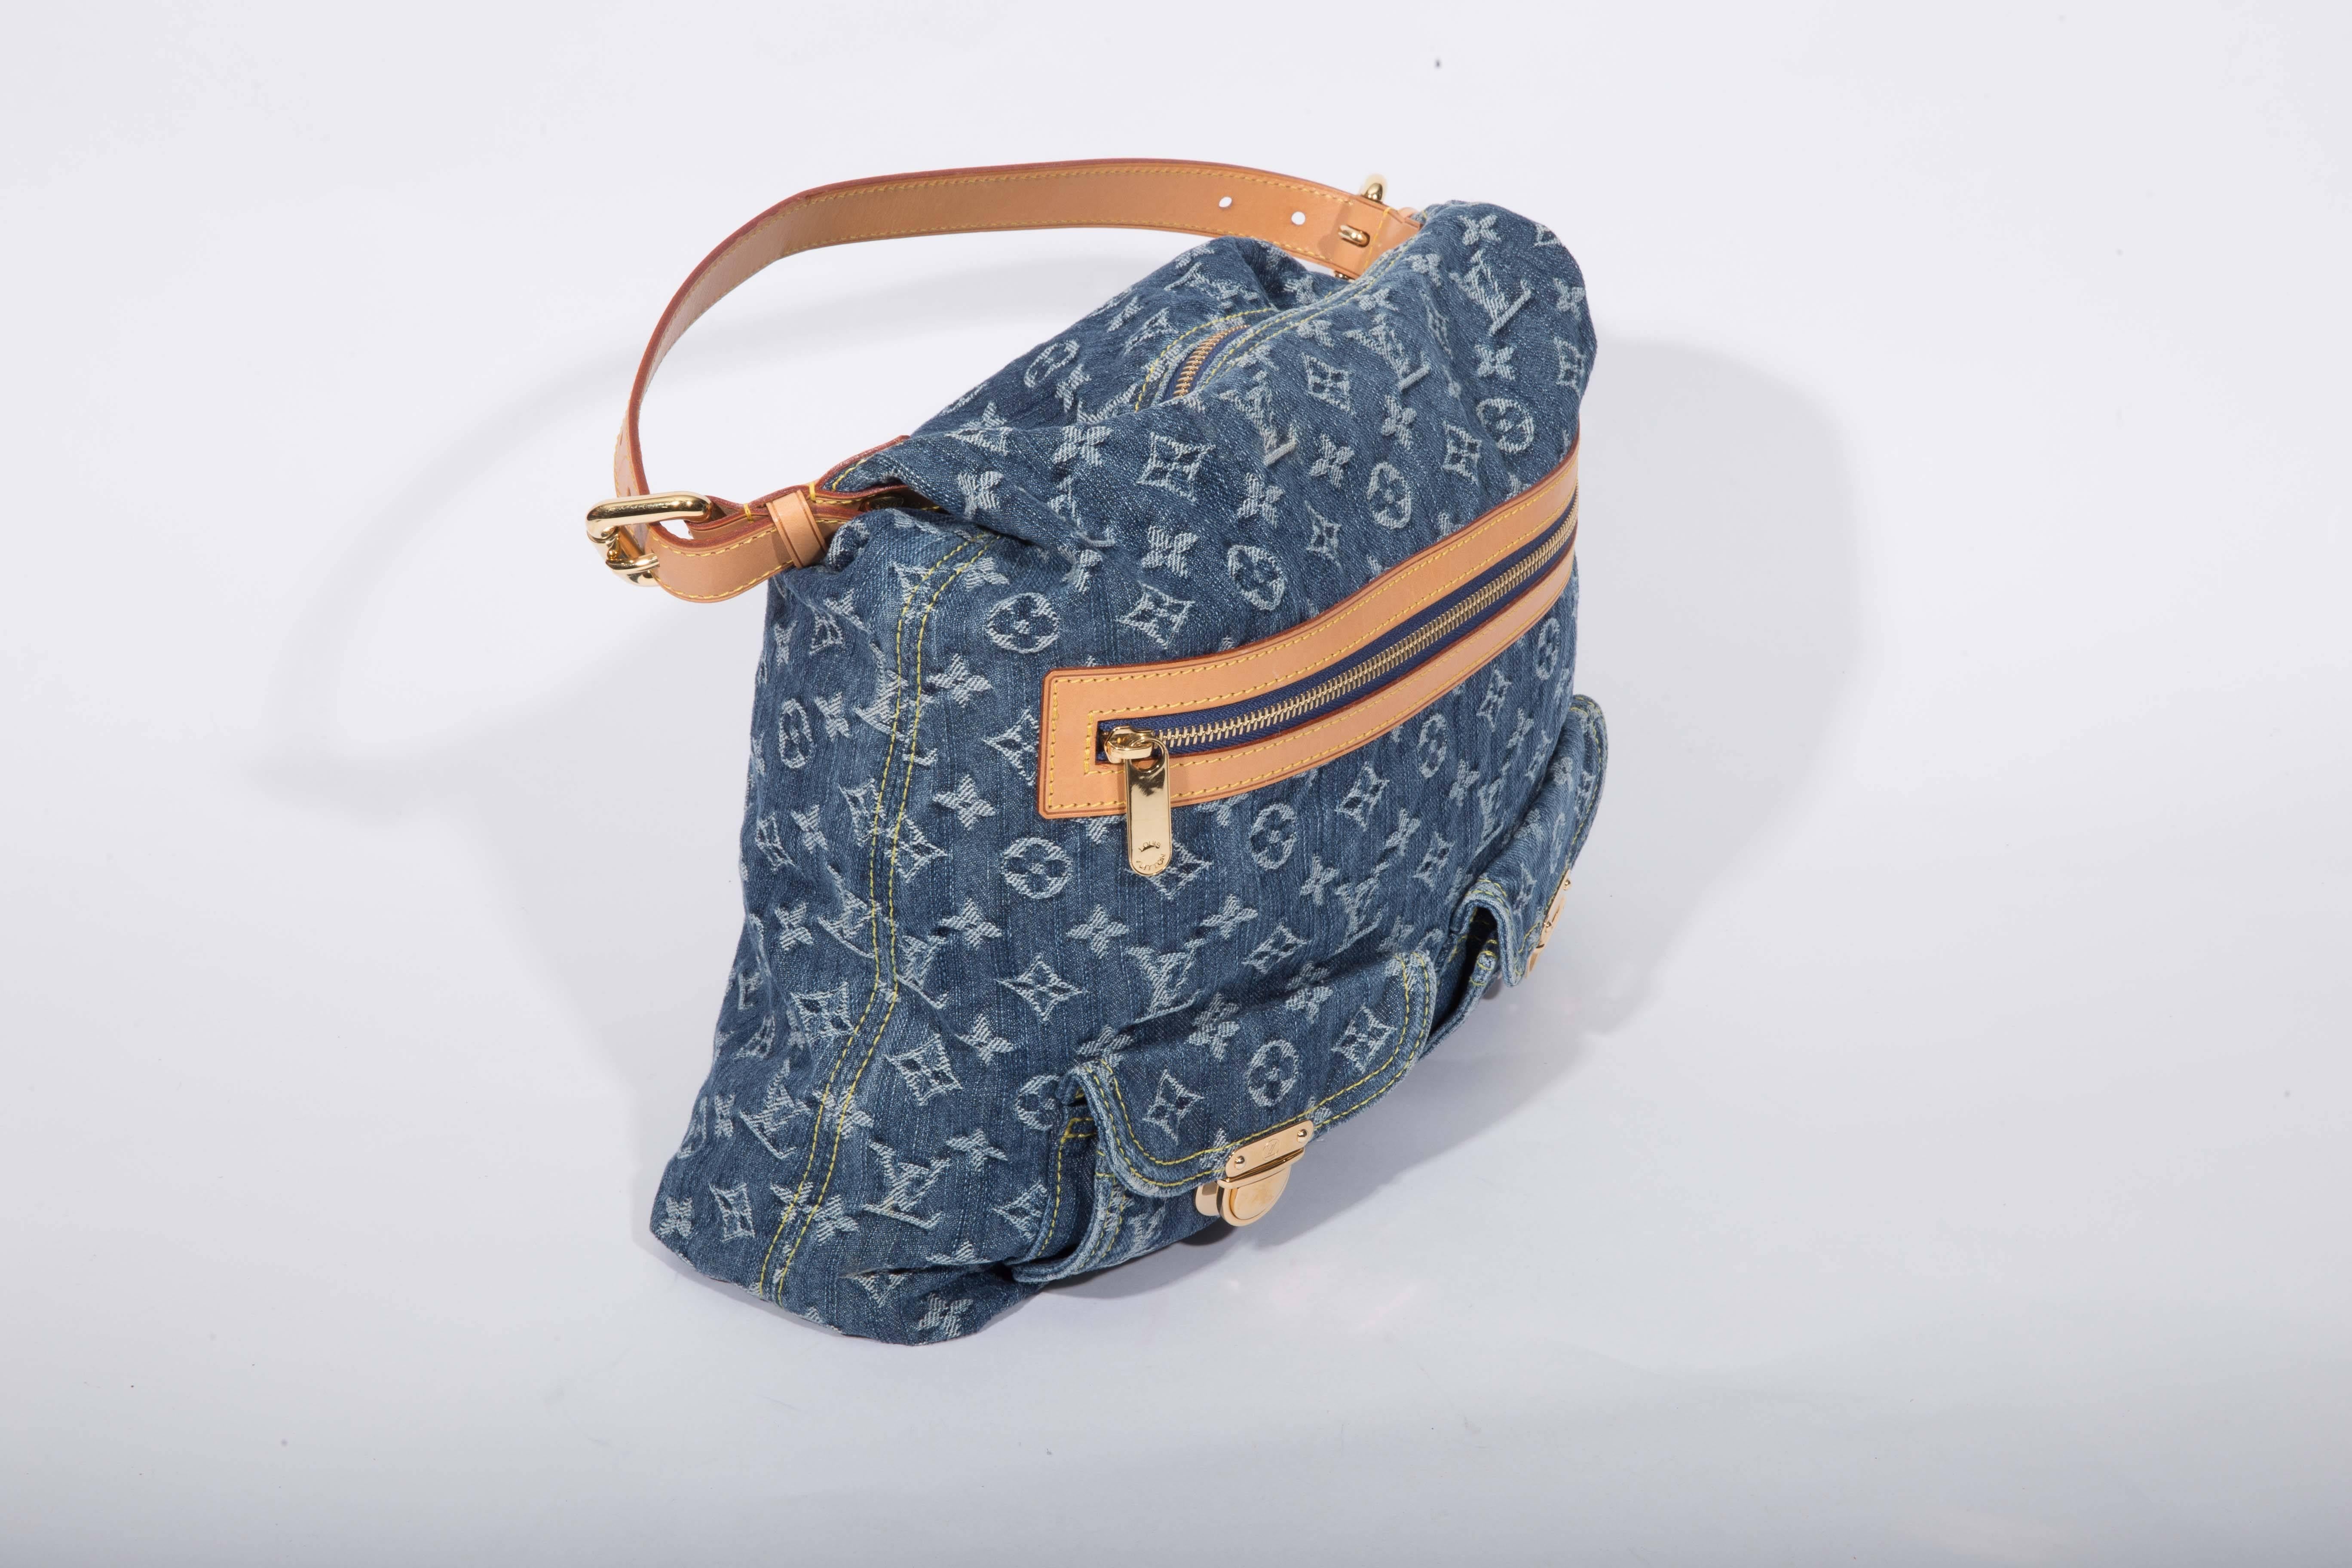 Blue monogram denim Lois Vuitton Baggy PM with brass hadware and tan vachetta leather accents throughout. Features a single flat shoulder strap, three front exterior pockets (one with zip closure and two with push lock closures). Marigold Alcantara